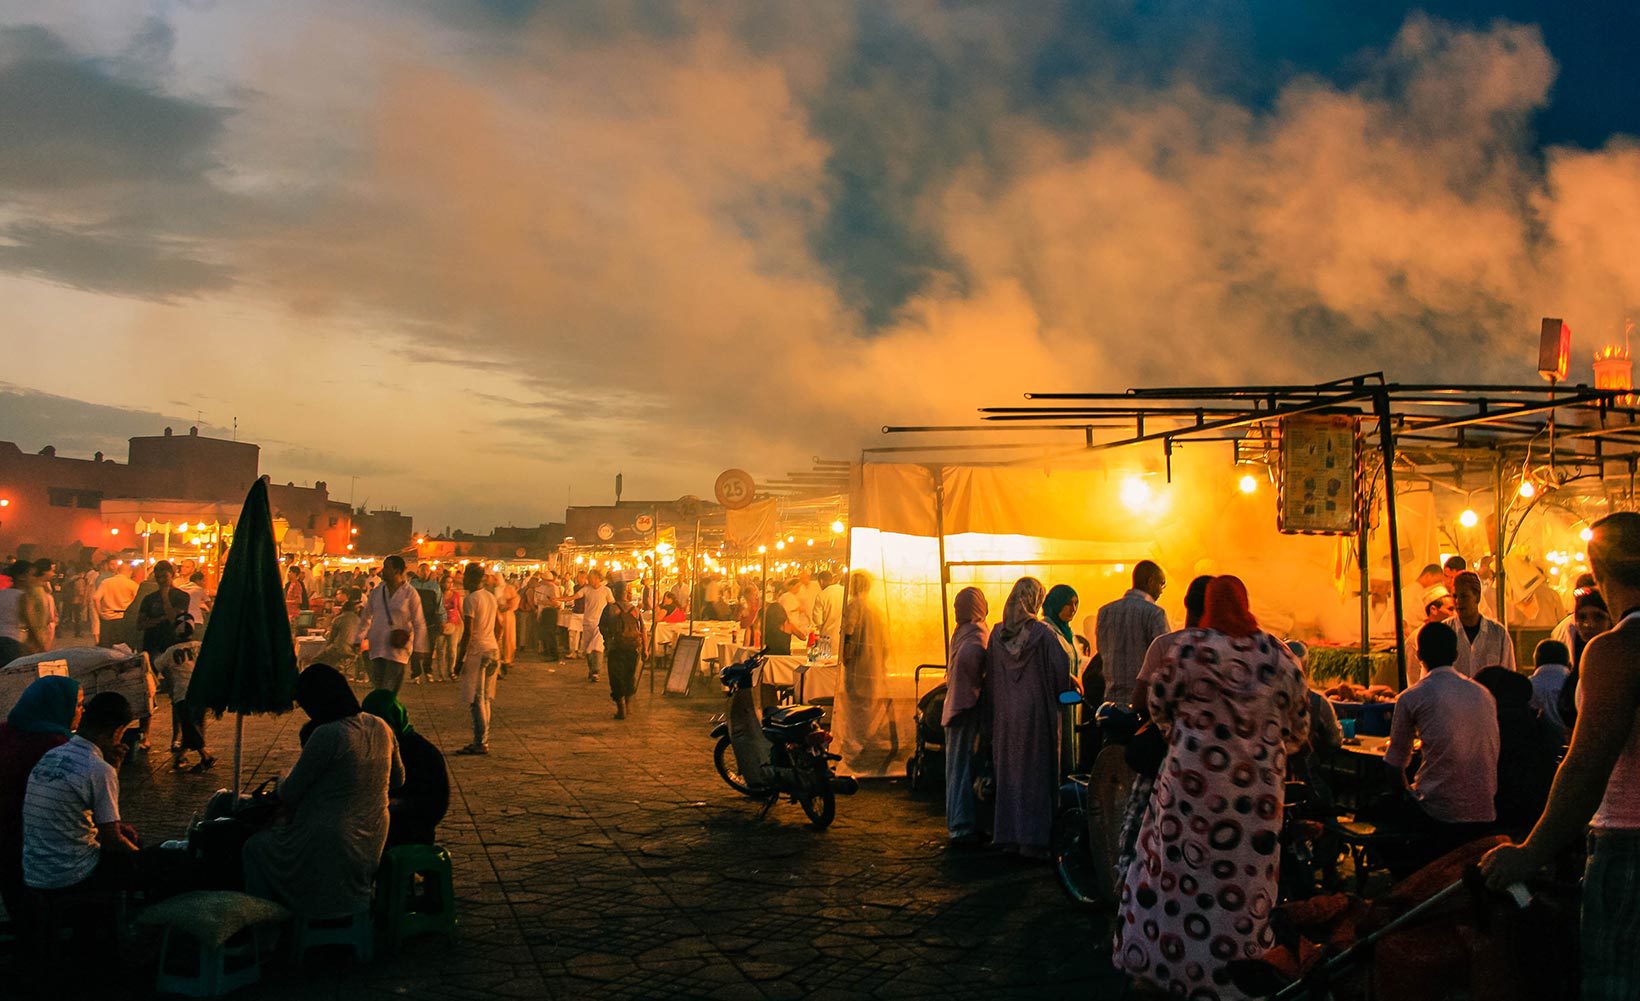 The Bazaar experience – 5 markets you need to visit when in India